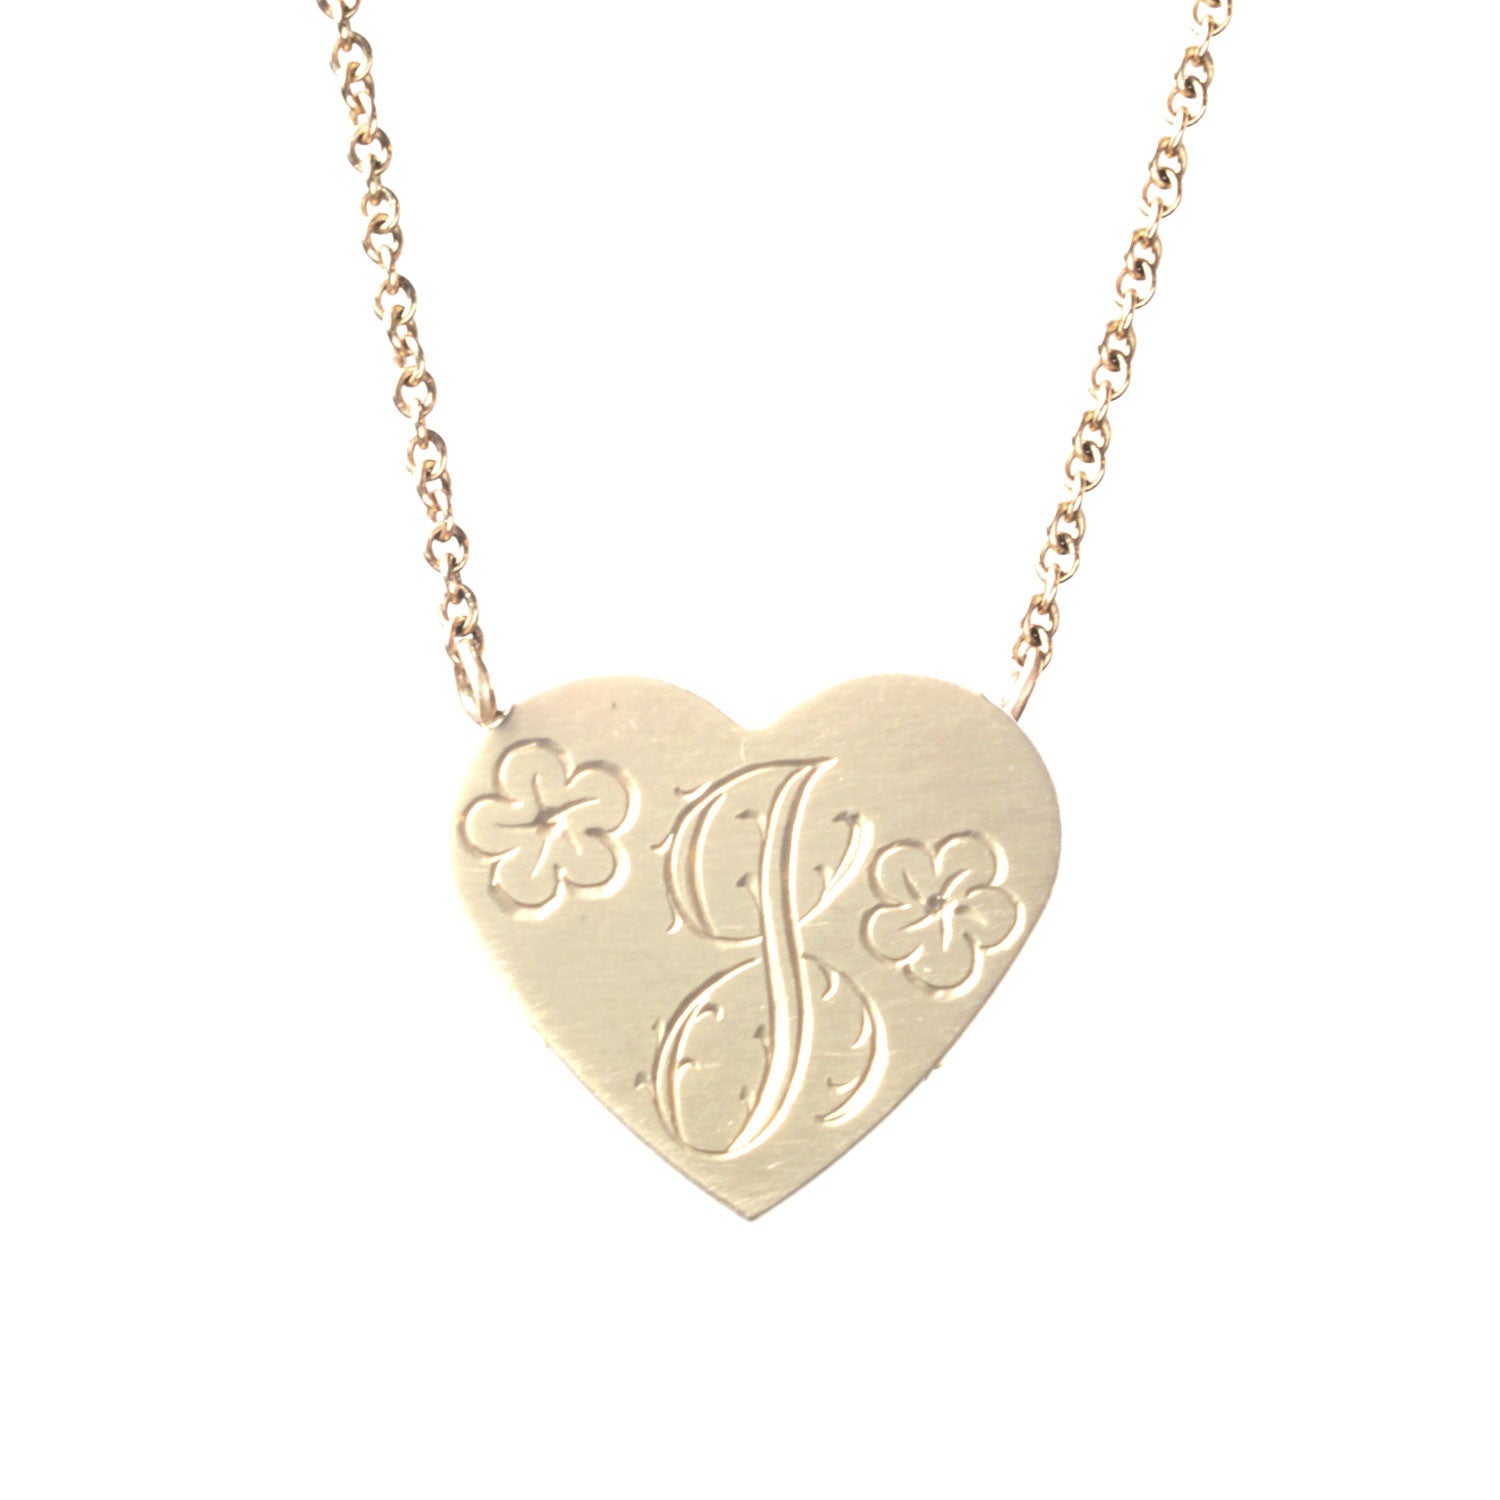 XL Floral Engraved Heart Necklace